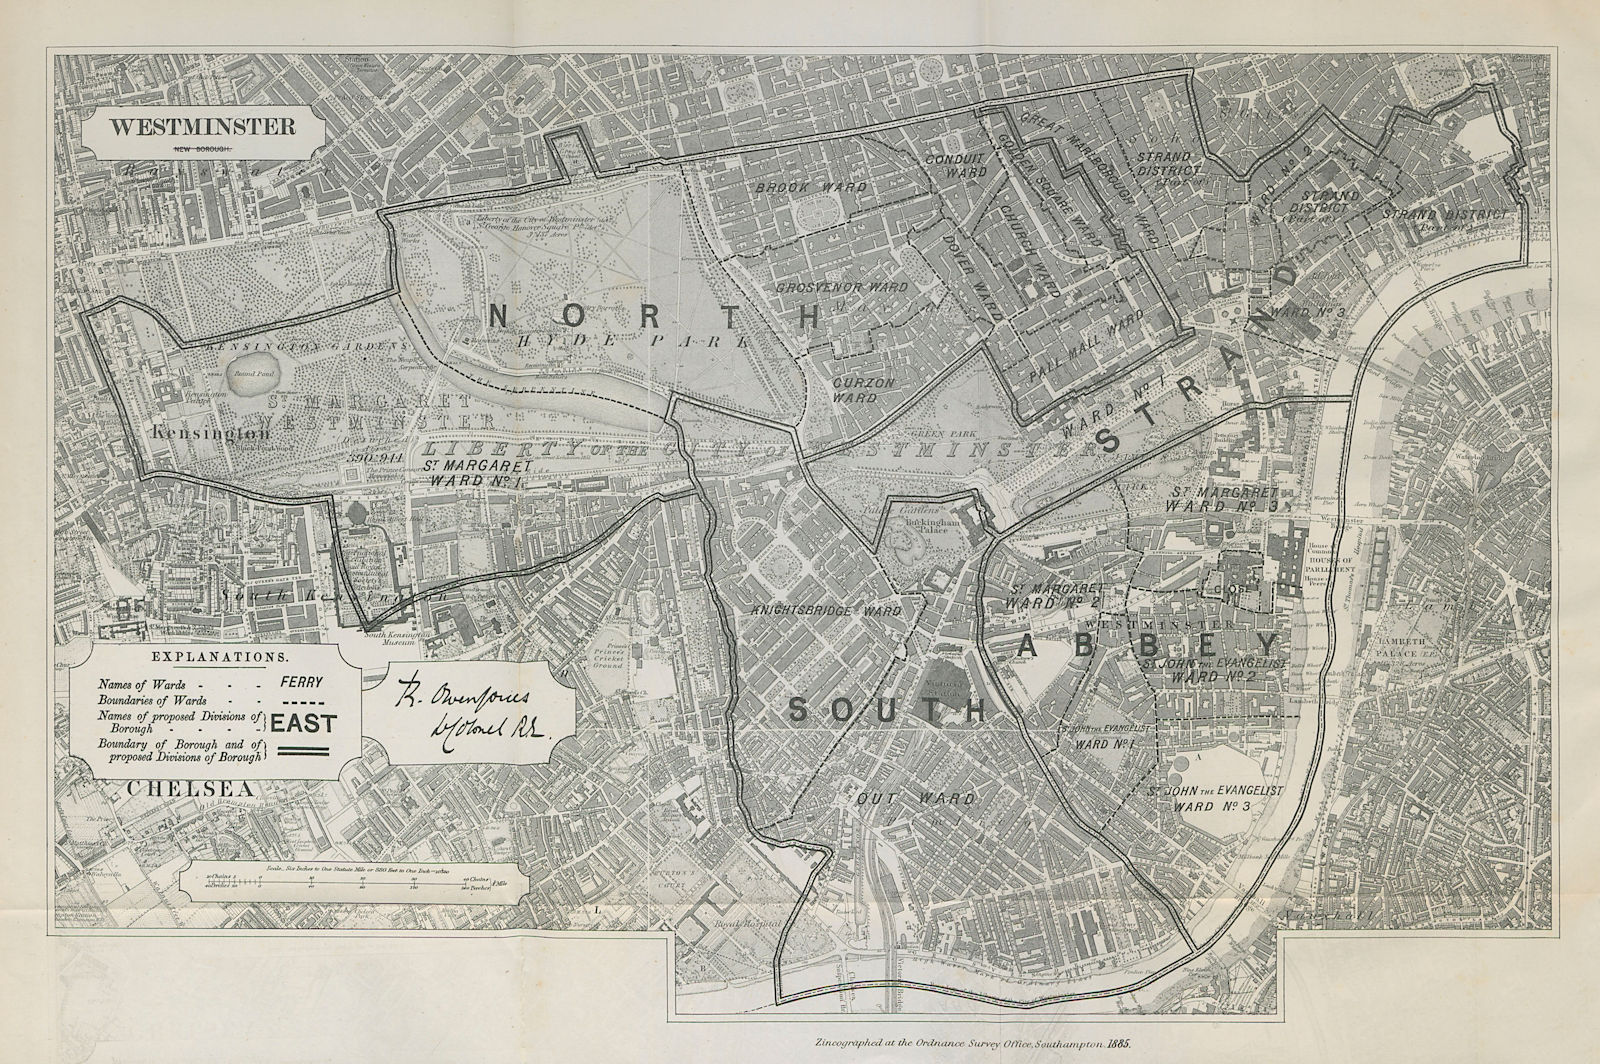 Associate Product Westminster Parliamentary Borough. Mayfair Pimlico. BOUNDARY COMMISSION 1885 map